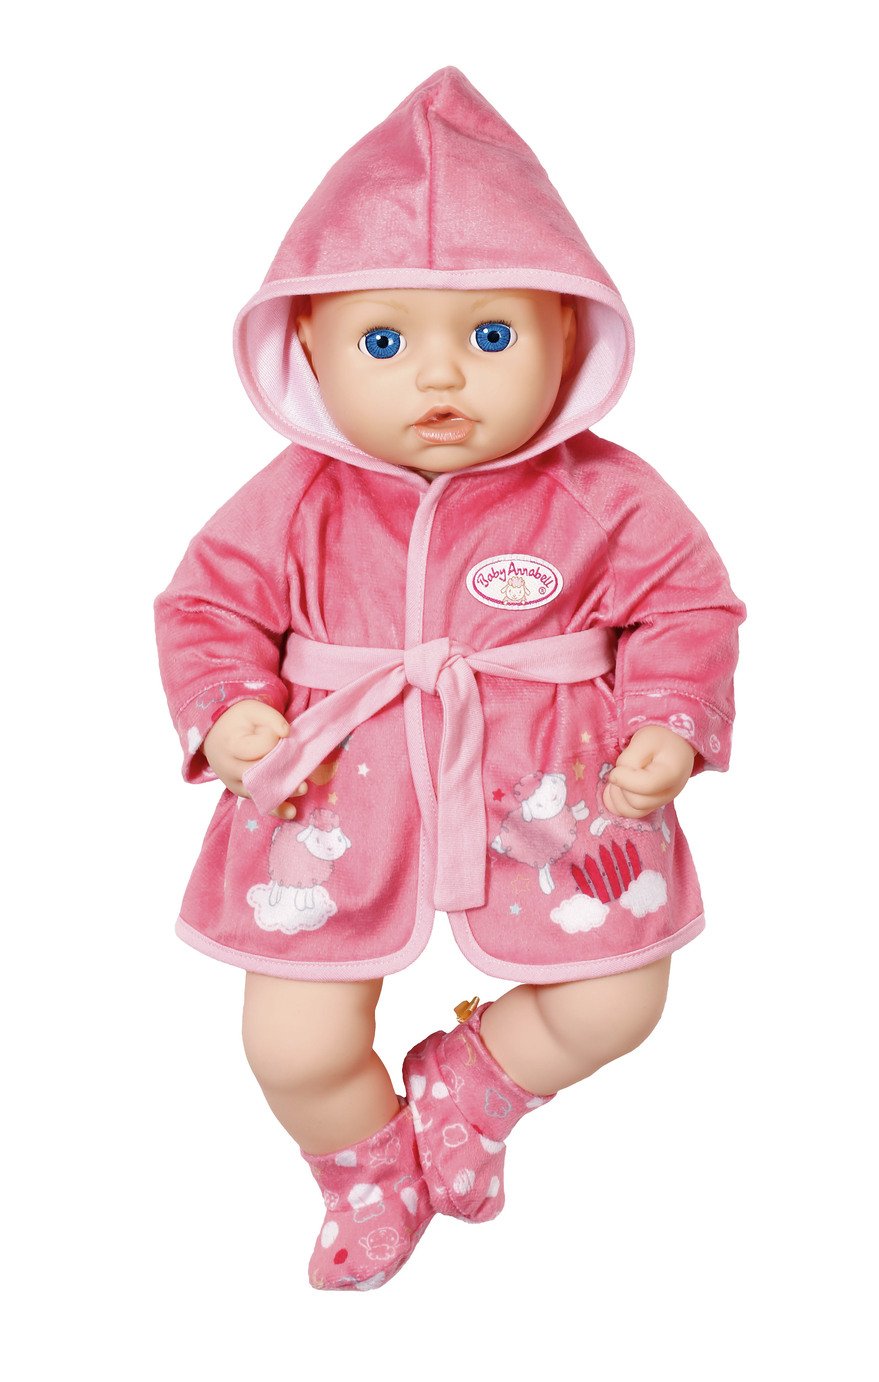 Baby Annabell Sweet Dreams Night Robe 43cm Review